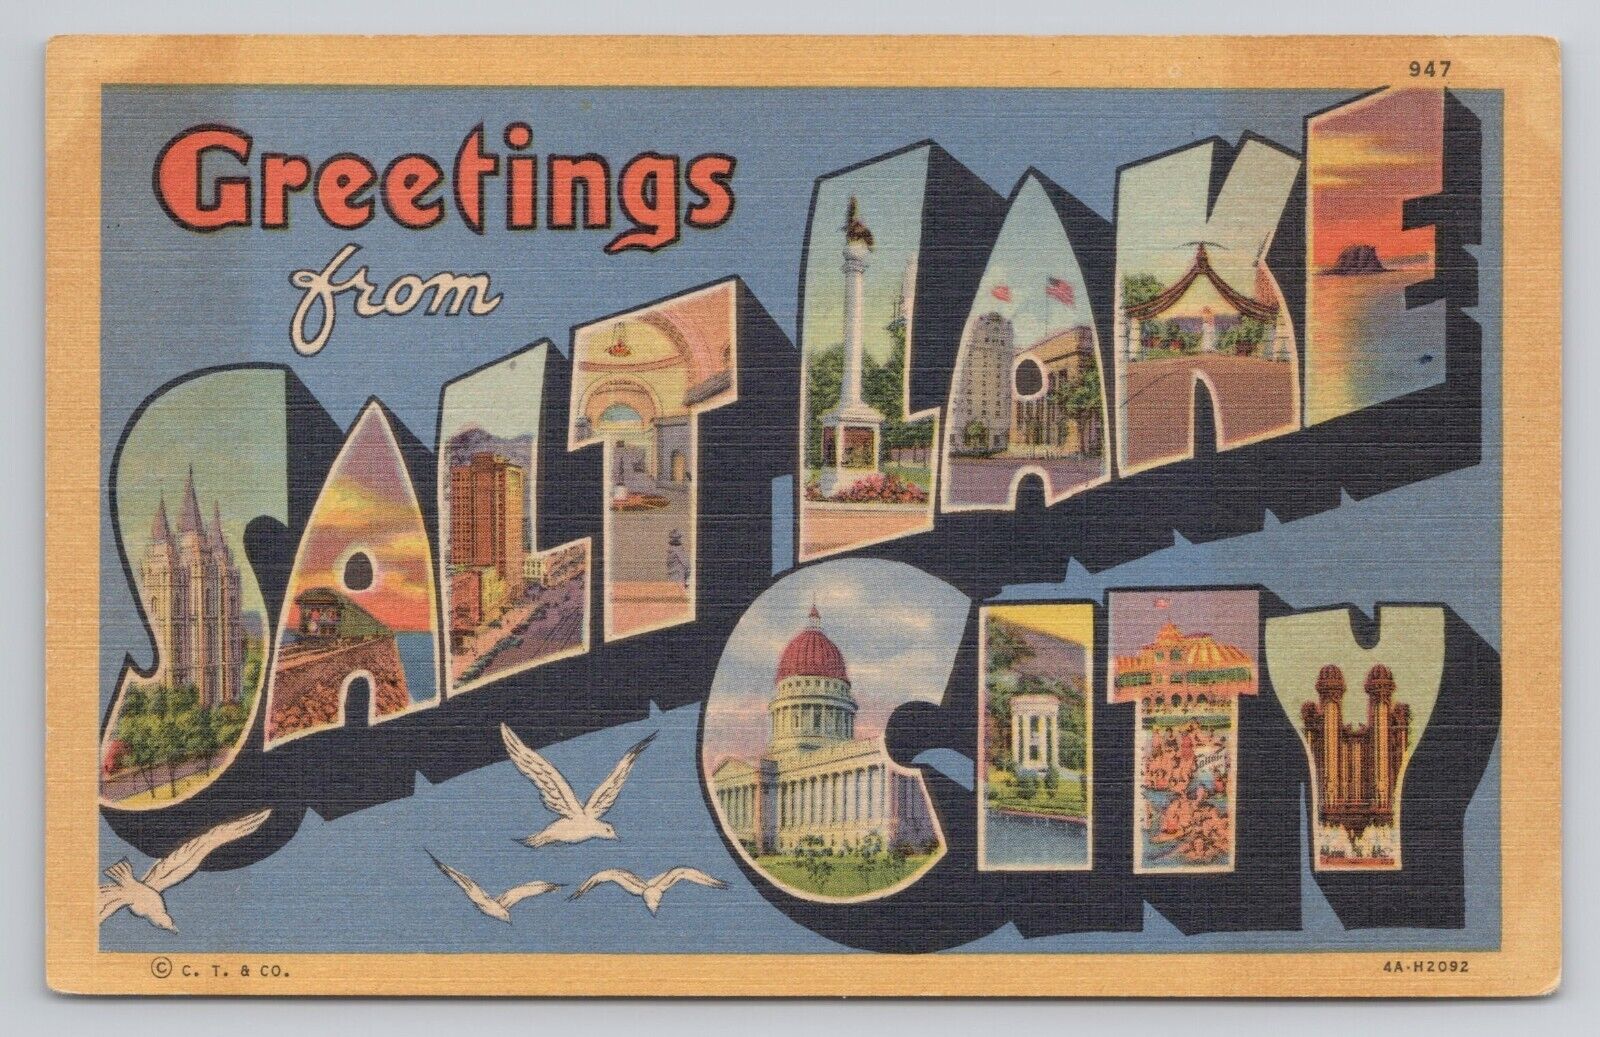 Greetings from Salt Lake City Large Letter Linen Postcard No 2891